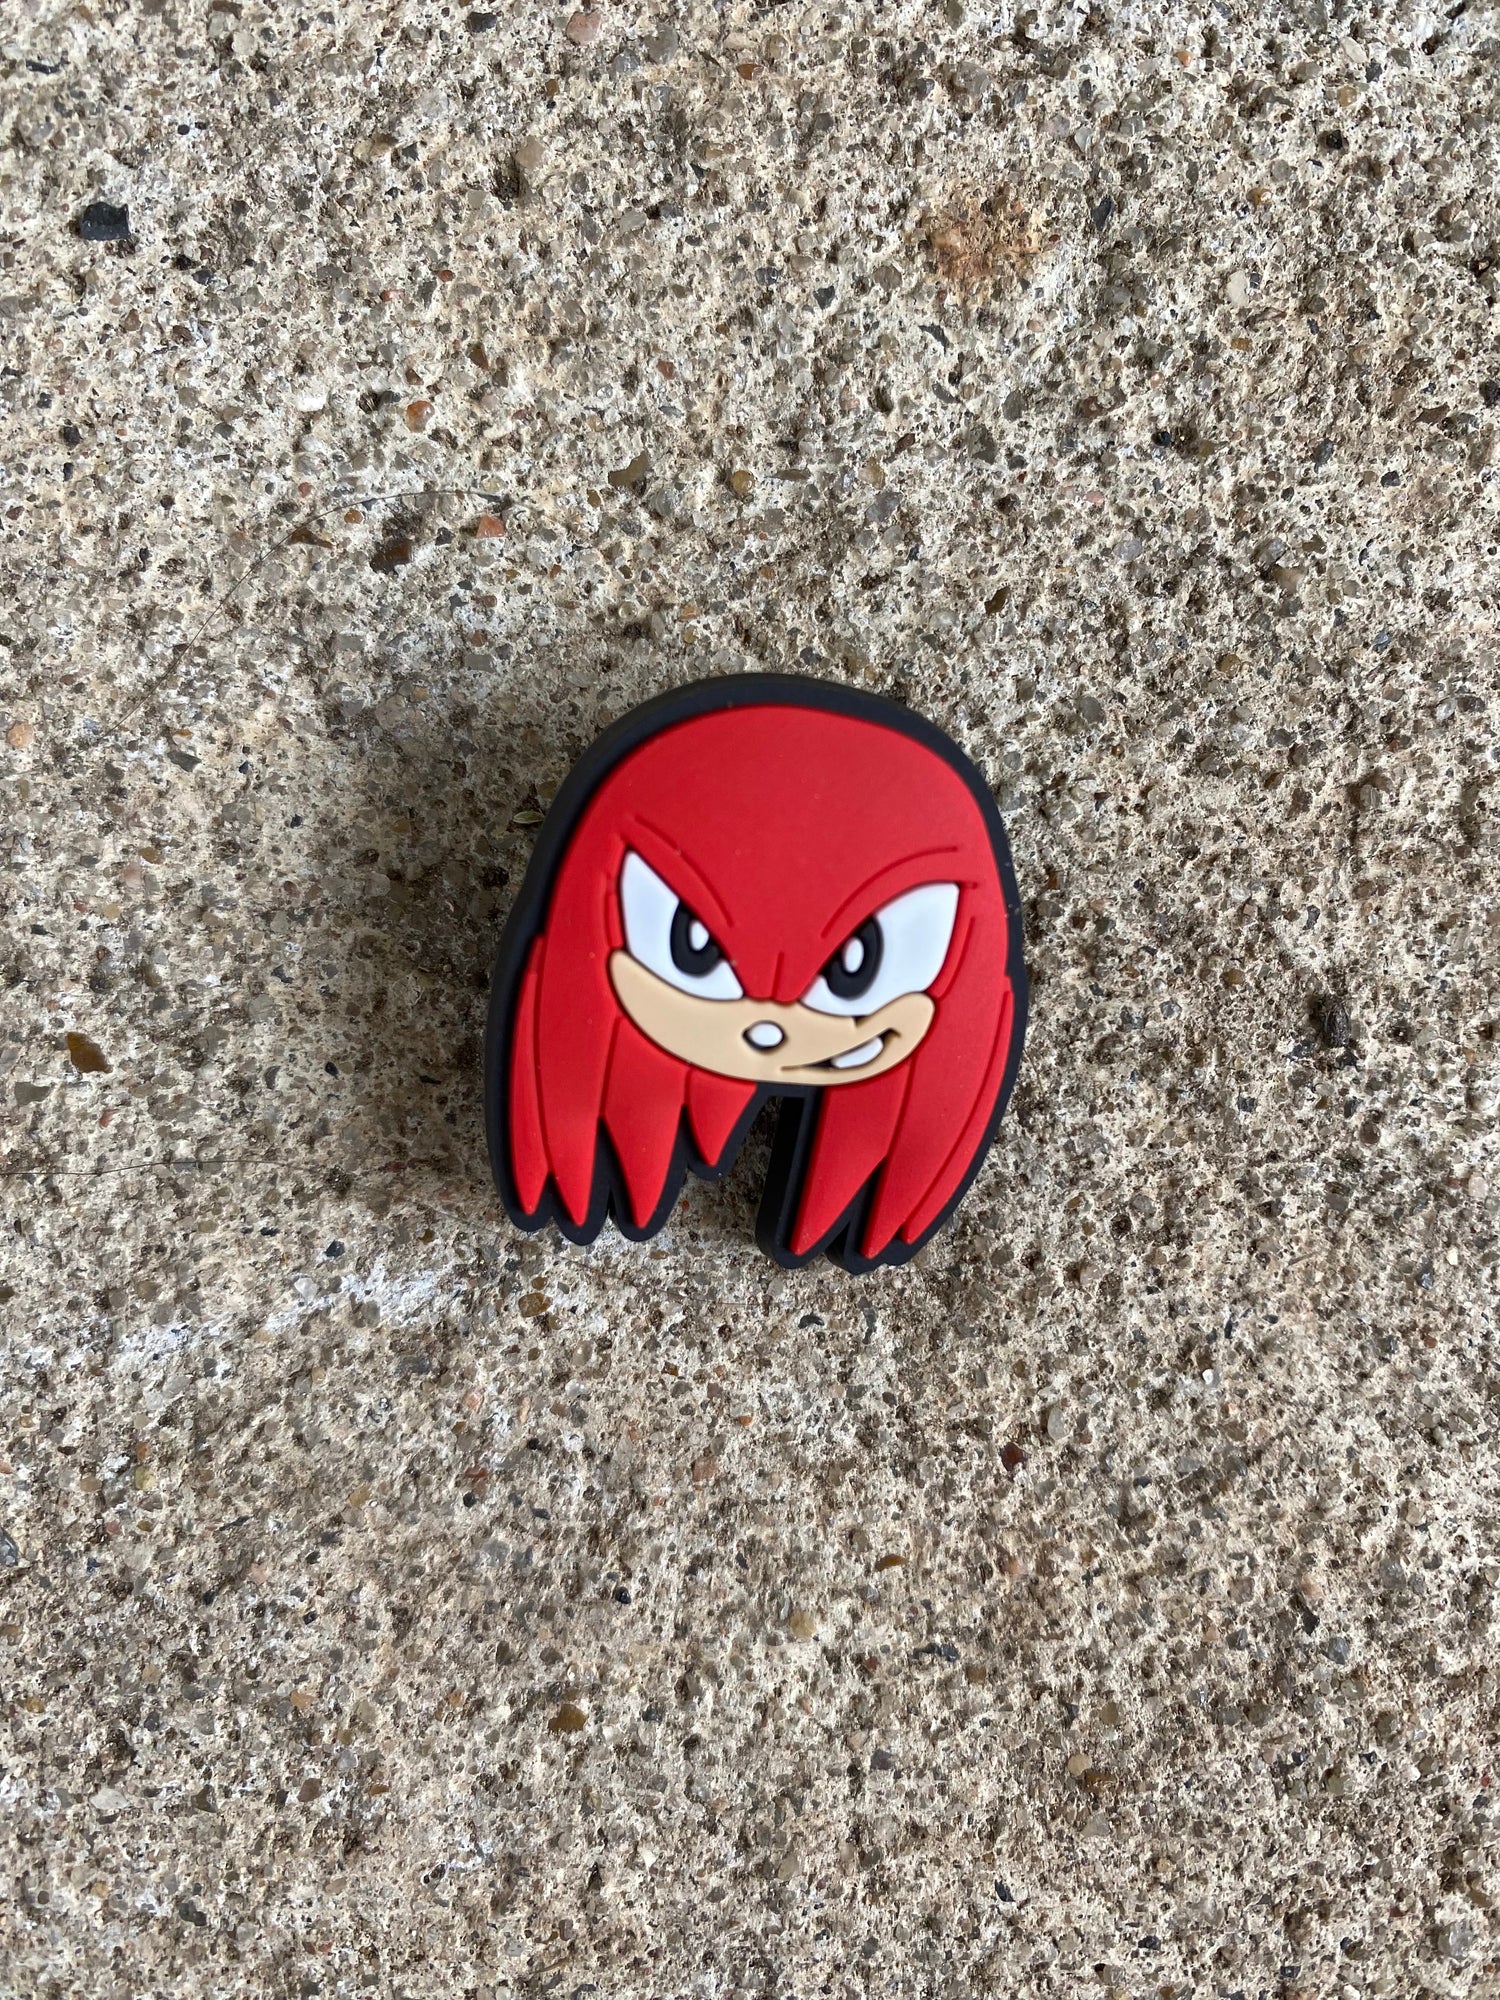 Knuckles the Echidna Croc shoe charms charm gift 